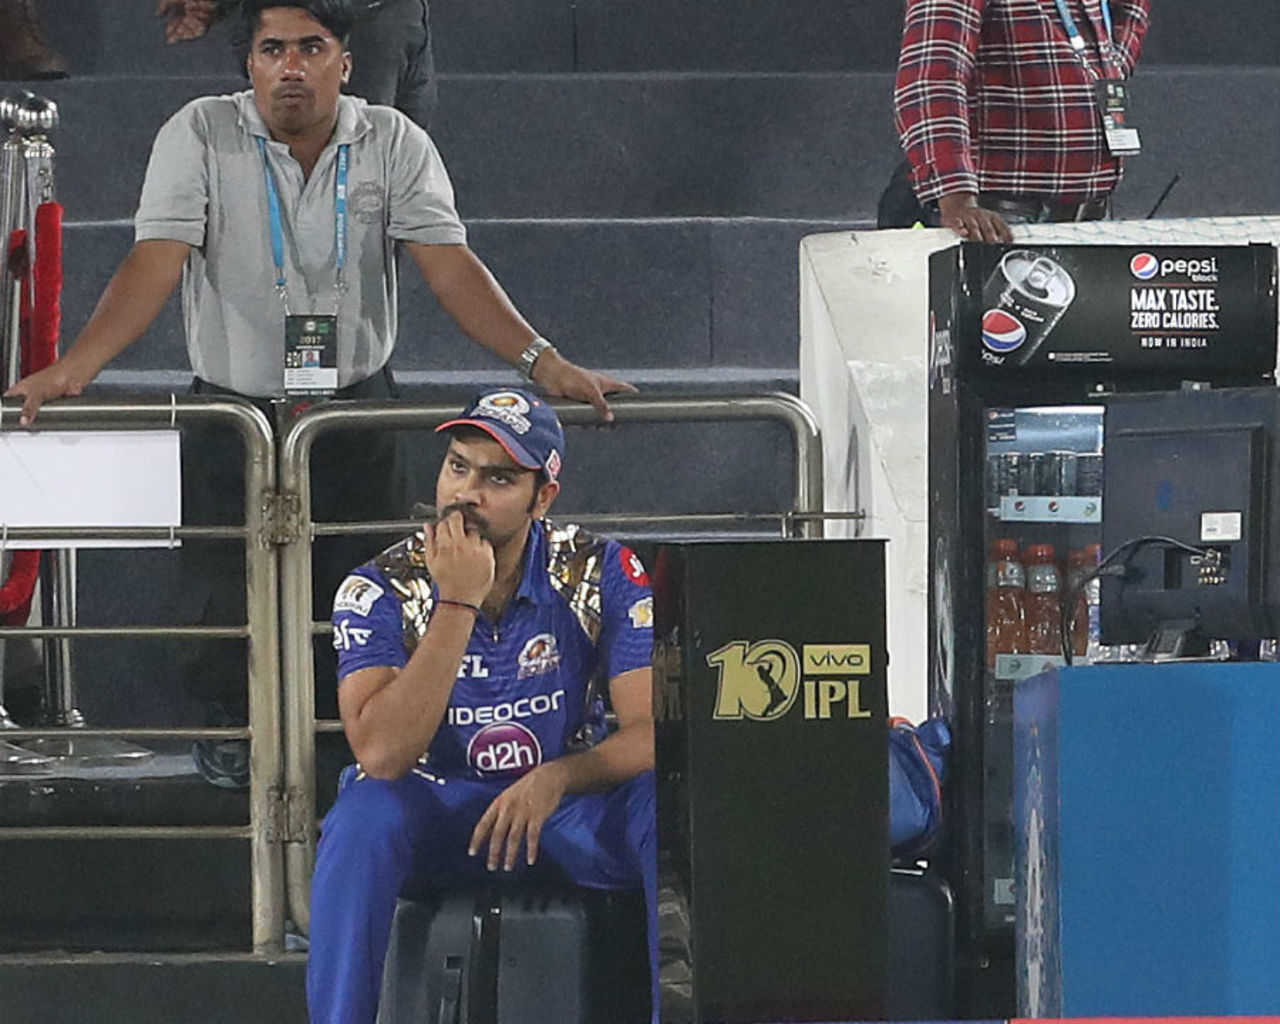 Rohit Sharma can't quite come to grips with the batting meltdown, Mumbai Indians v Rising Pune Supergiant, IPL final, Hyderabad, May 21, 2017